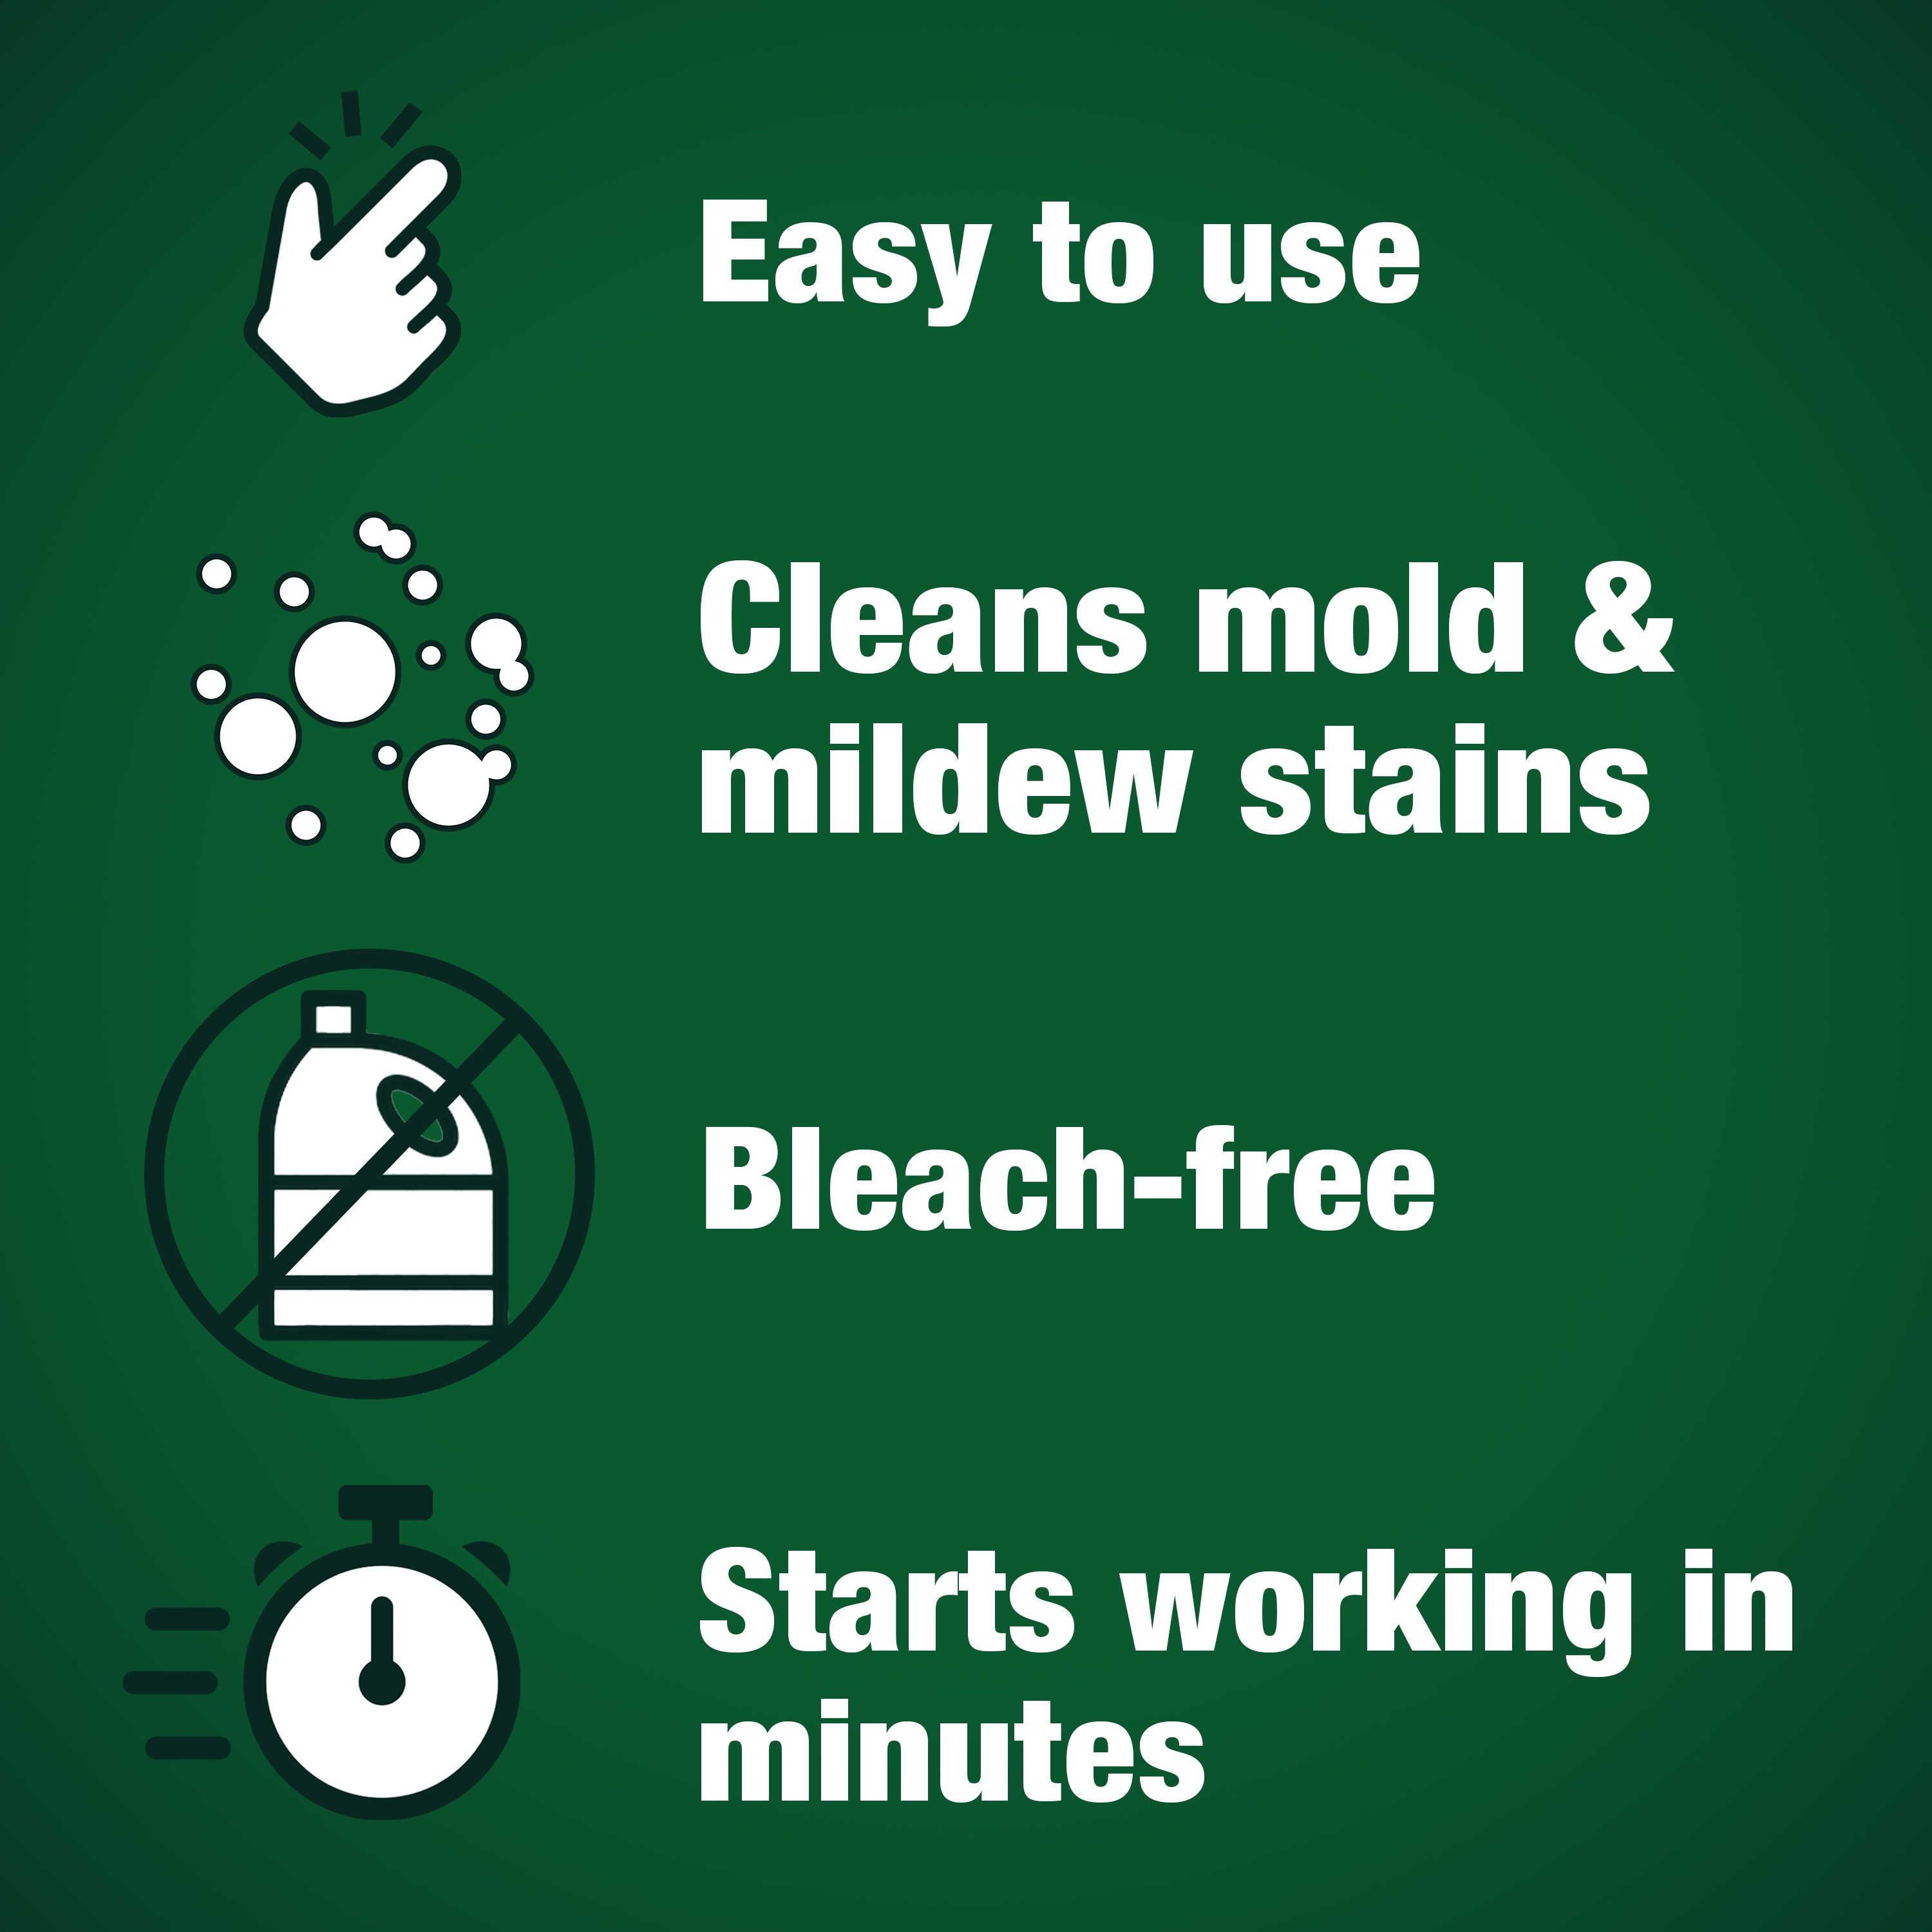 Mold Armor 32 oz. Mold and Mildew Killer and Quick Stain Remover